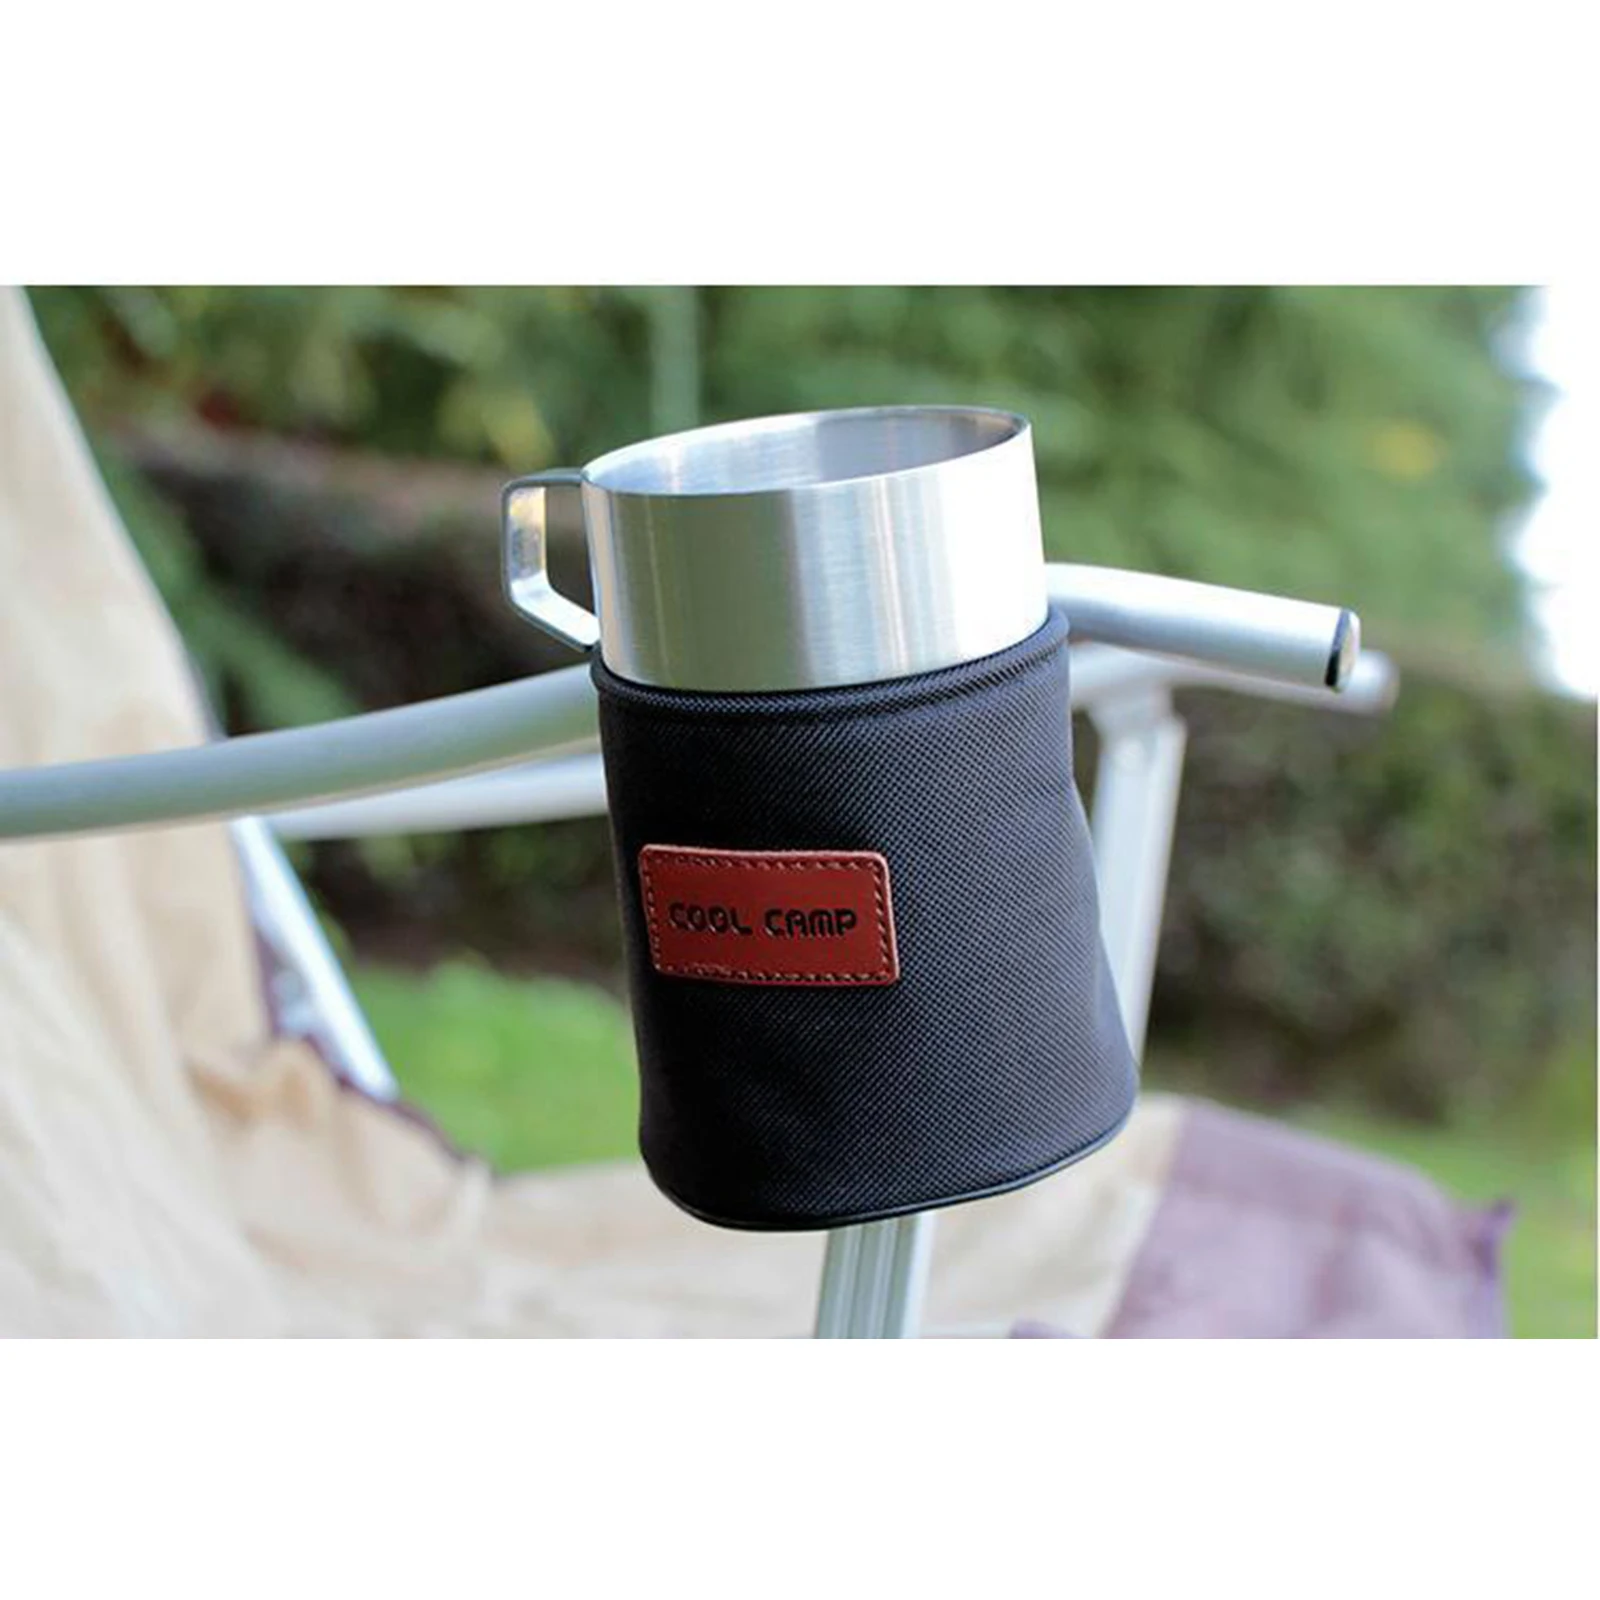 Moutain Bike Water Cup Holder Organizer Drink Water Bottle Mount Stand Chair Side Storage Bag For Outdoor Cycling Camping